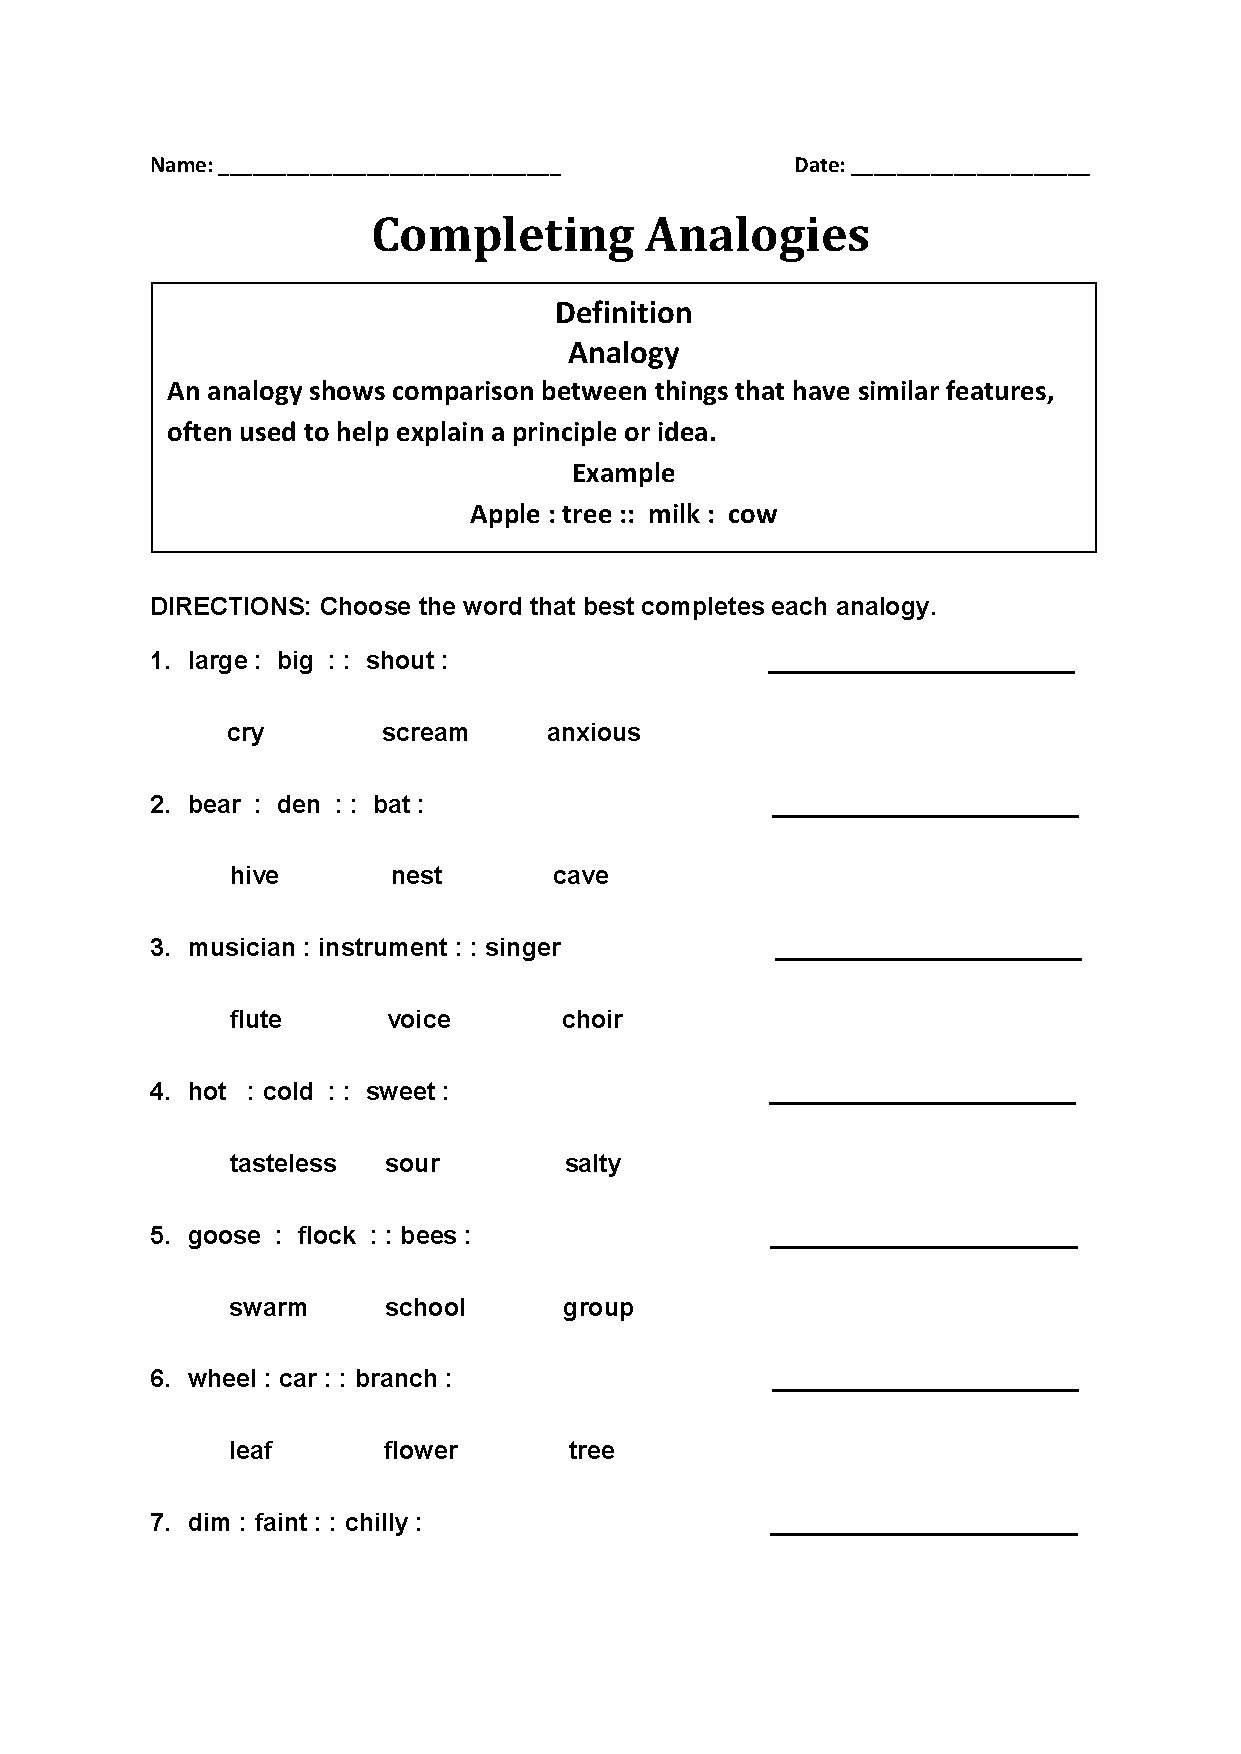 Completing Analogy Worksheets